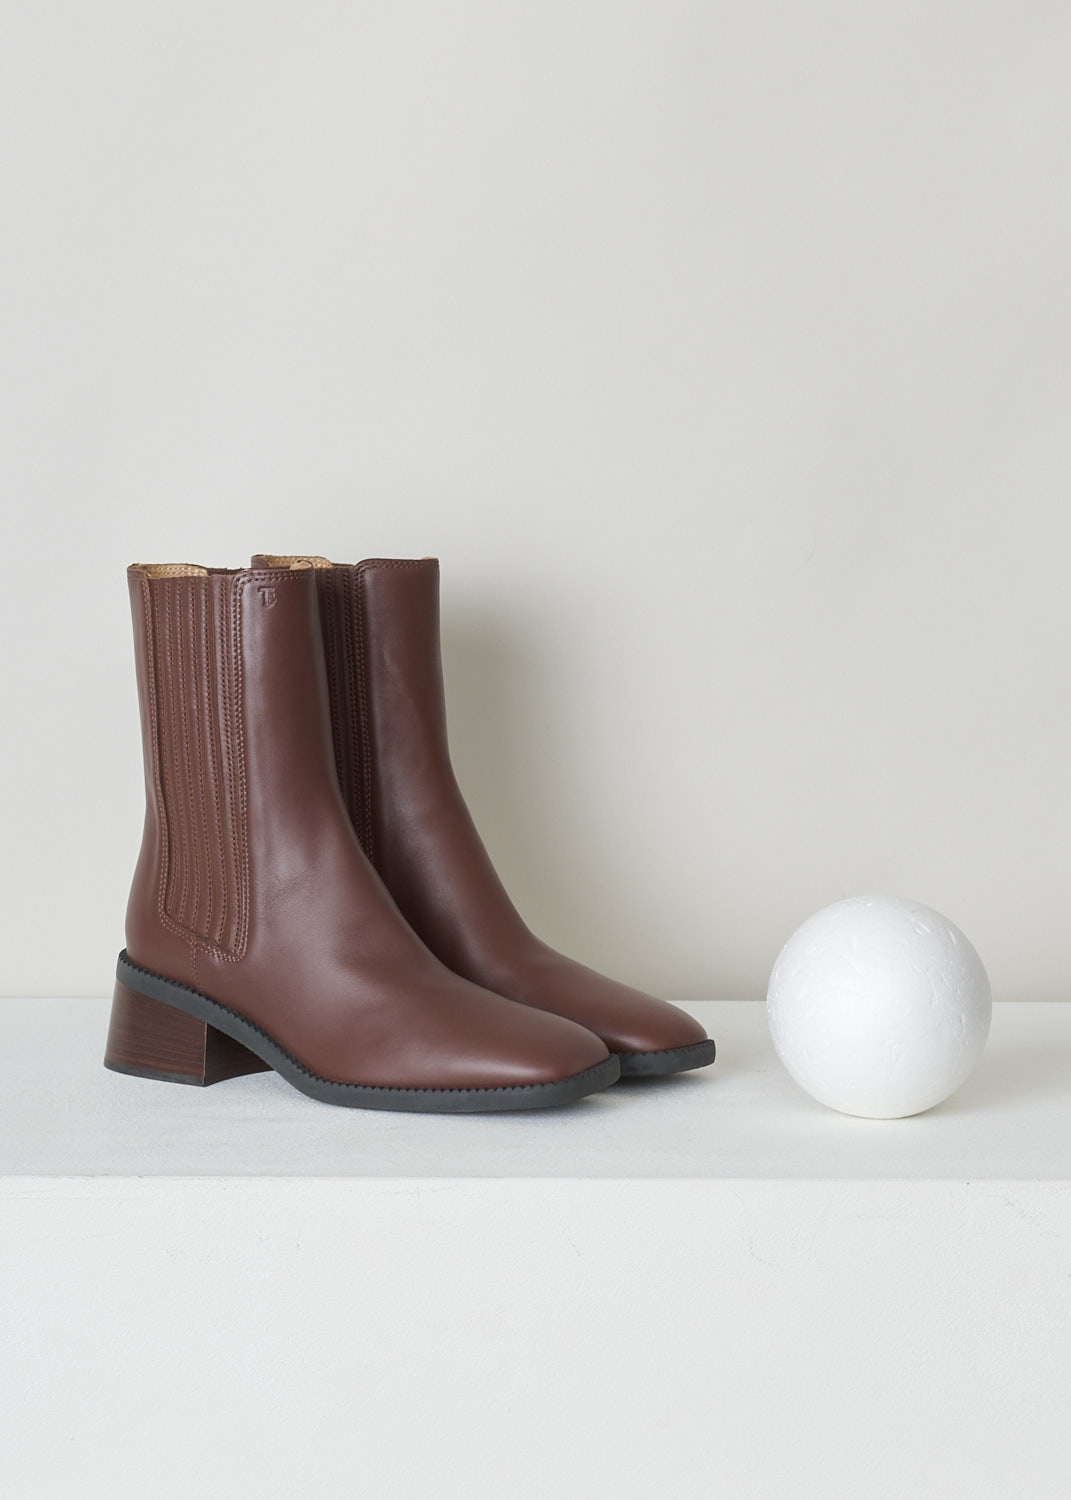 TODS, WARM BROWN BOOTS WITH GUSSETED SIDES, XXW48K0FX80TFSS202_T55_TRONCH_ELAST, Brown, Front, These warm brown leather slip-on boots feature elasticated gusseted sides with a ribbed pattern, a squared toe and a block heel in brown. 

